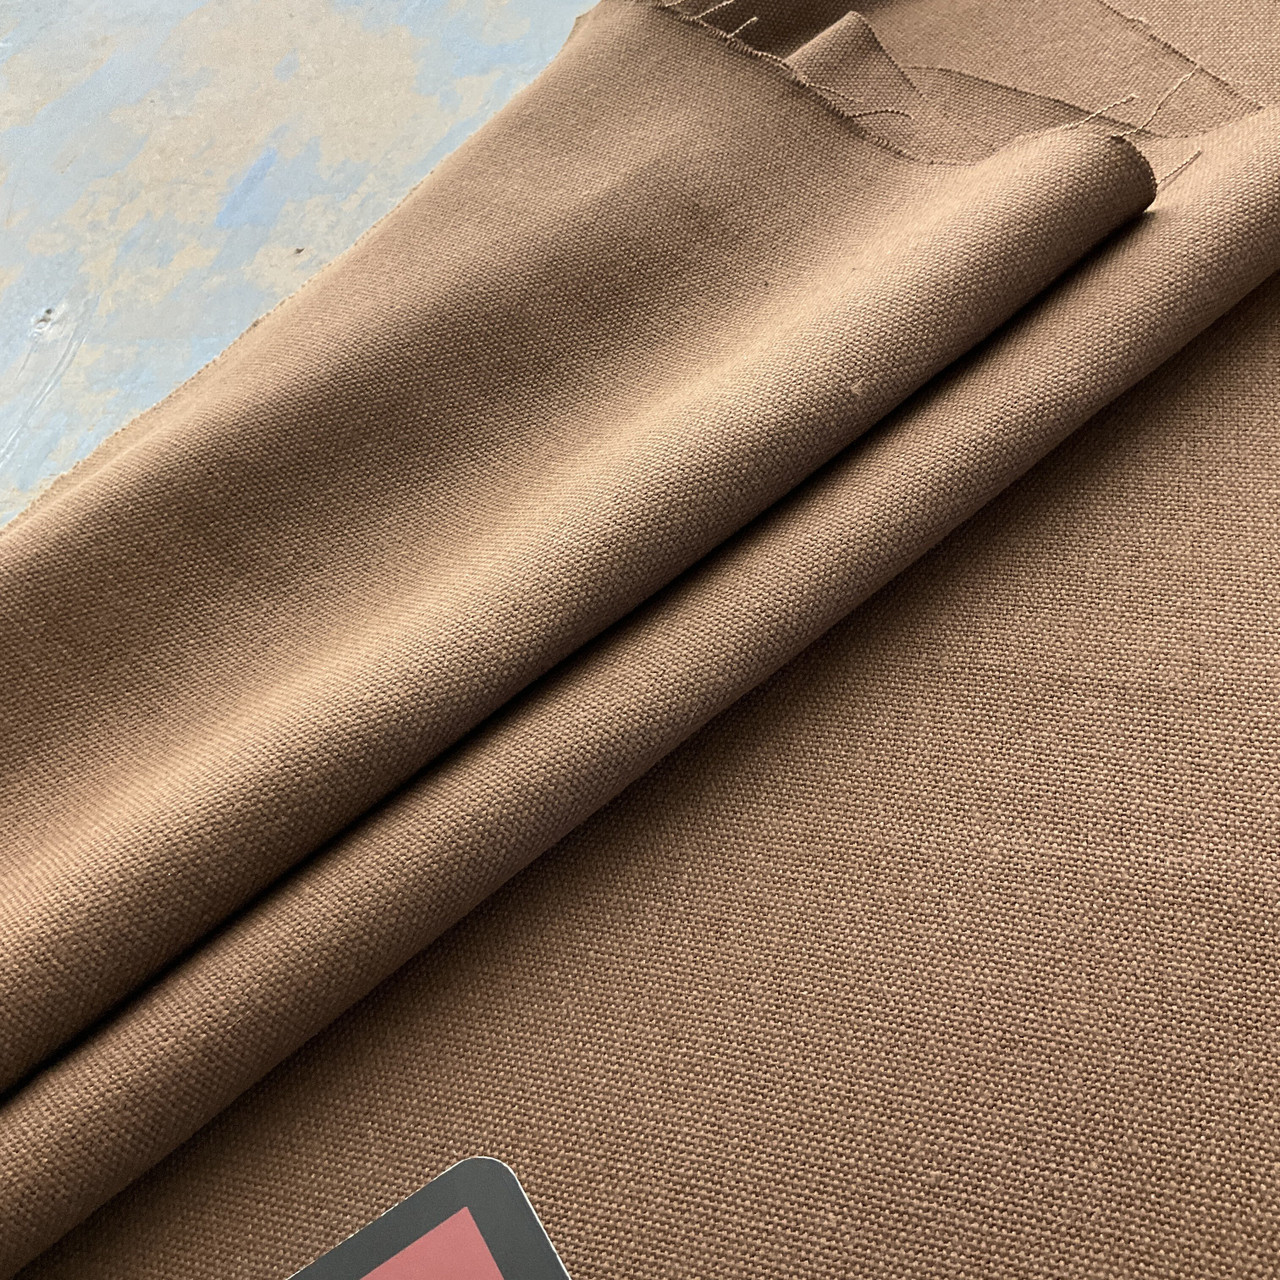 16 Oz Waxed Canvas Fabric, Hand Waxed Cotton Canvas Fabric, Waxed Duck Canvas  Fabric, Waterproof Canvas Fabric, Sold by the Half Yard 